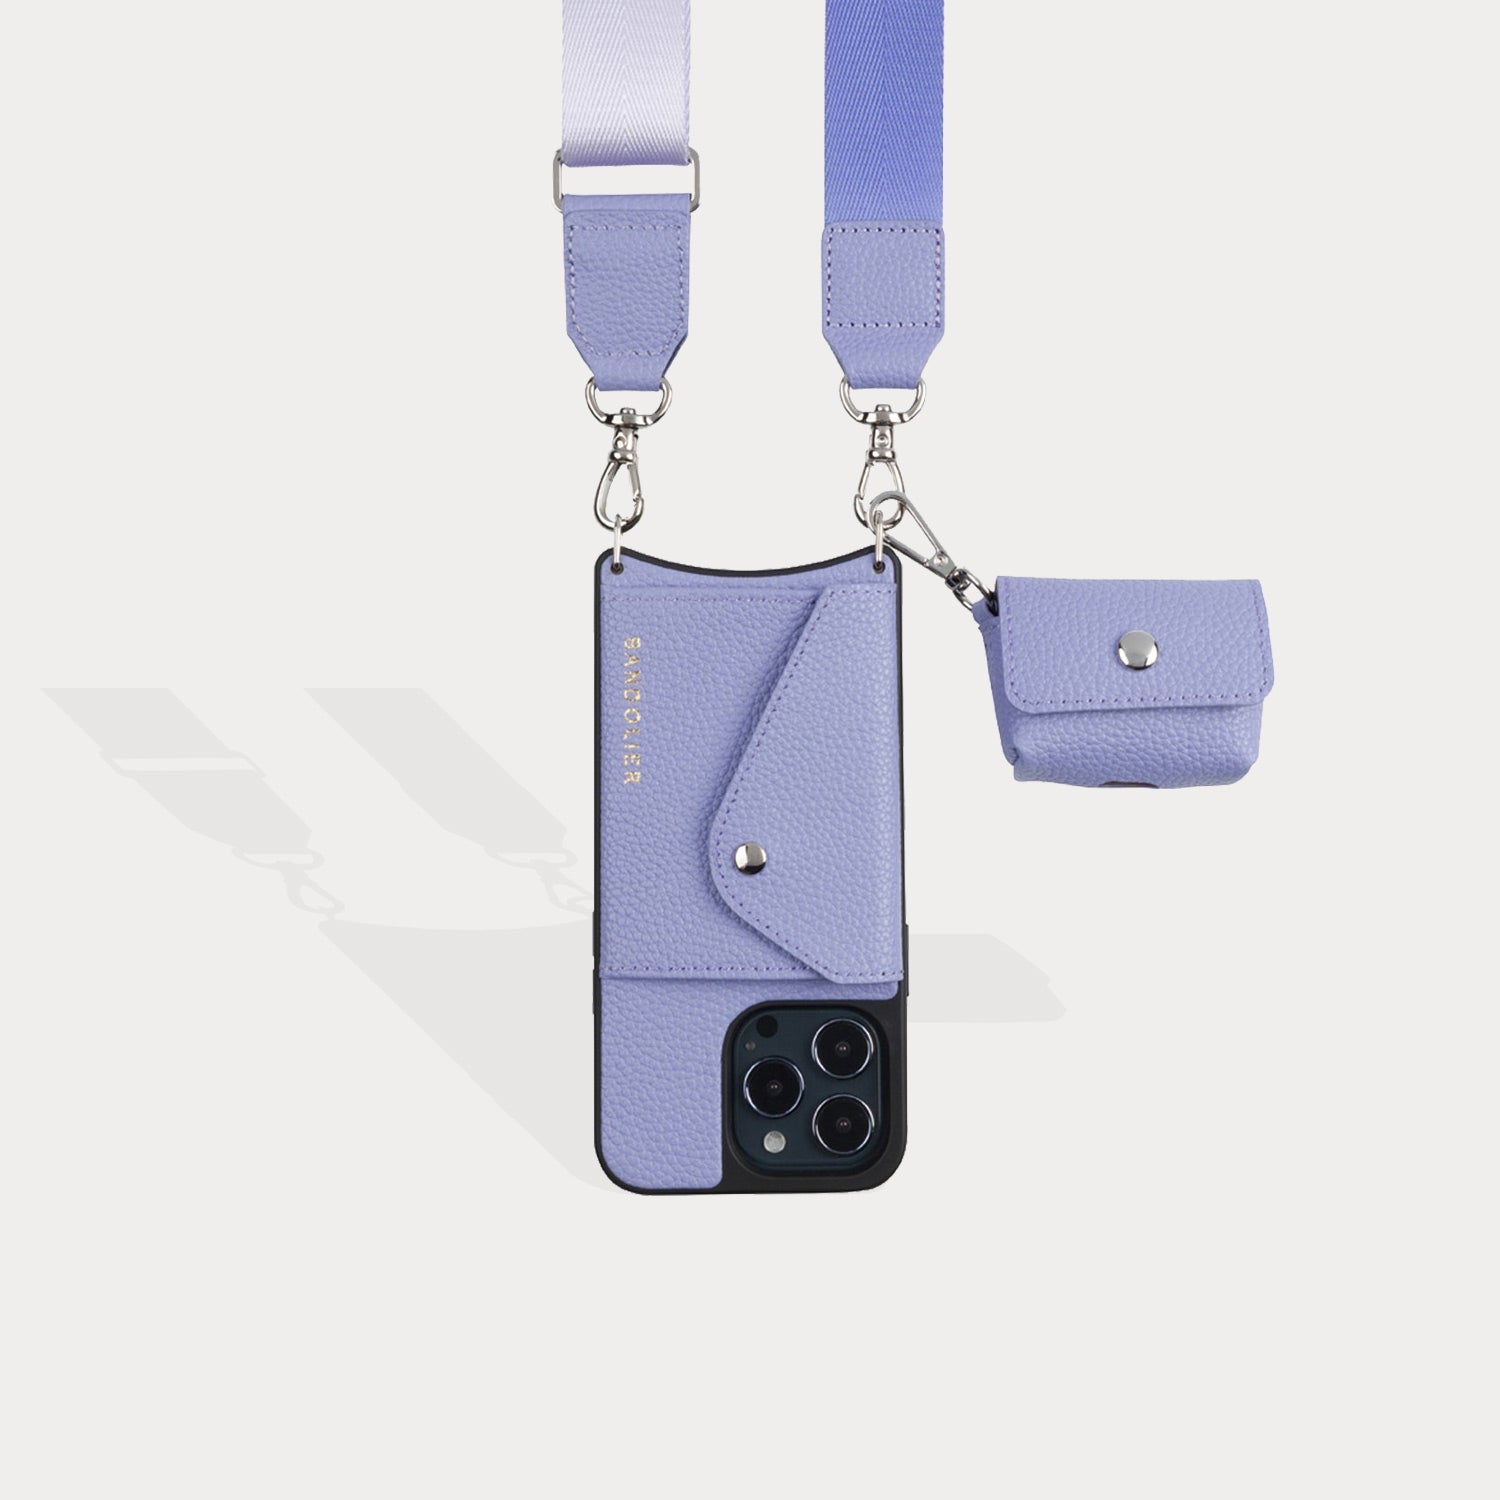 Avery AirPod Clip-On Pouch - Lavender/Silver Pouch Core Bandolier 